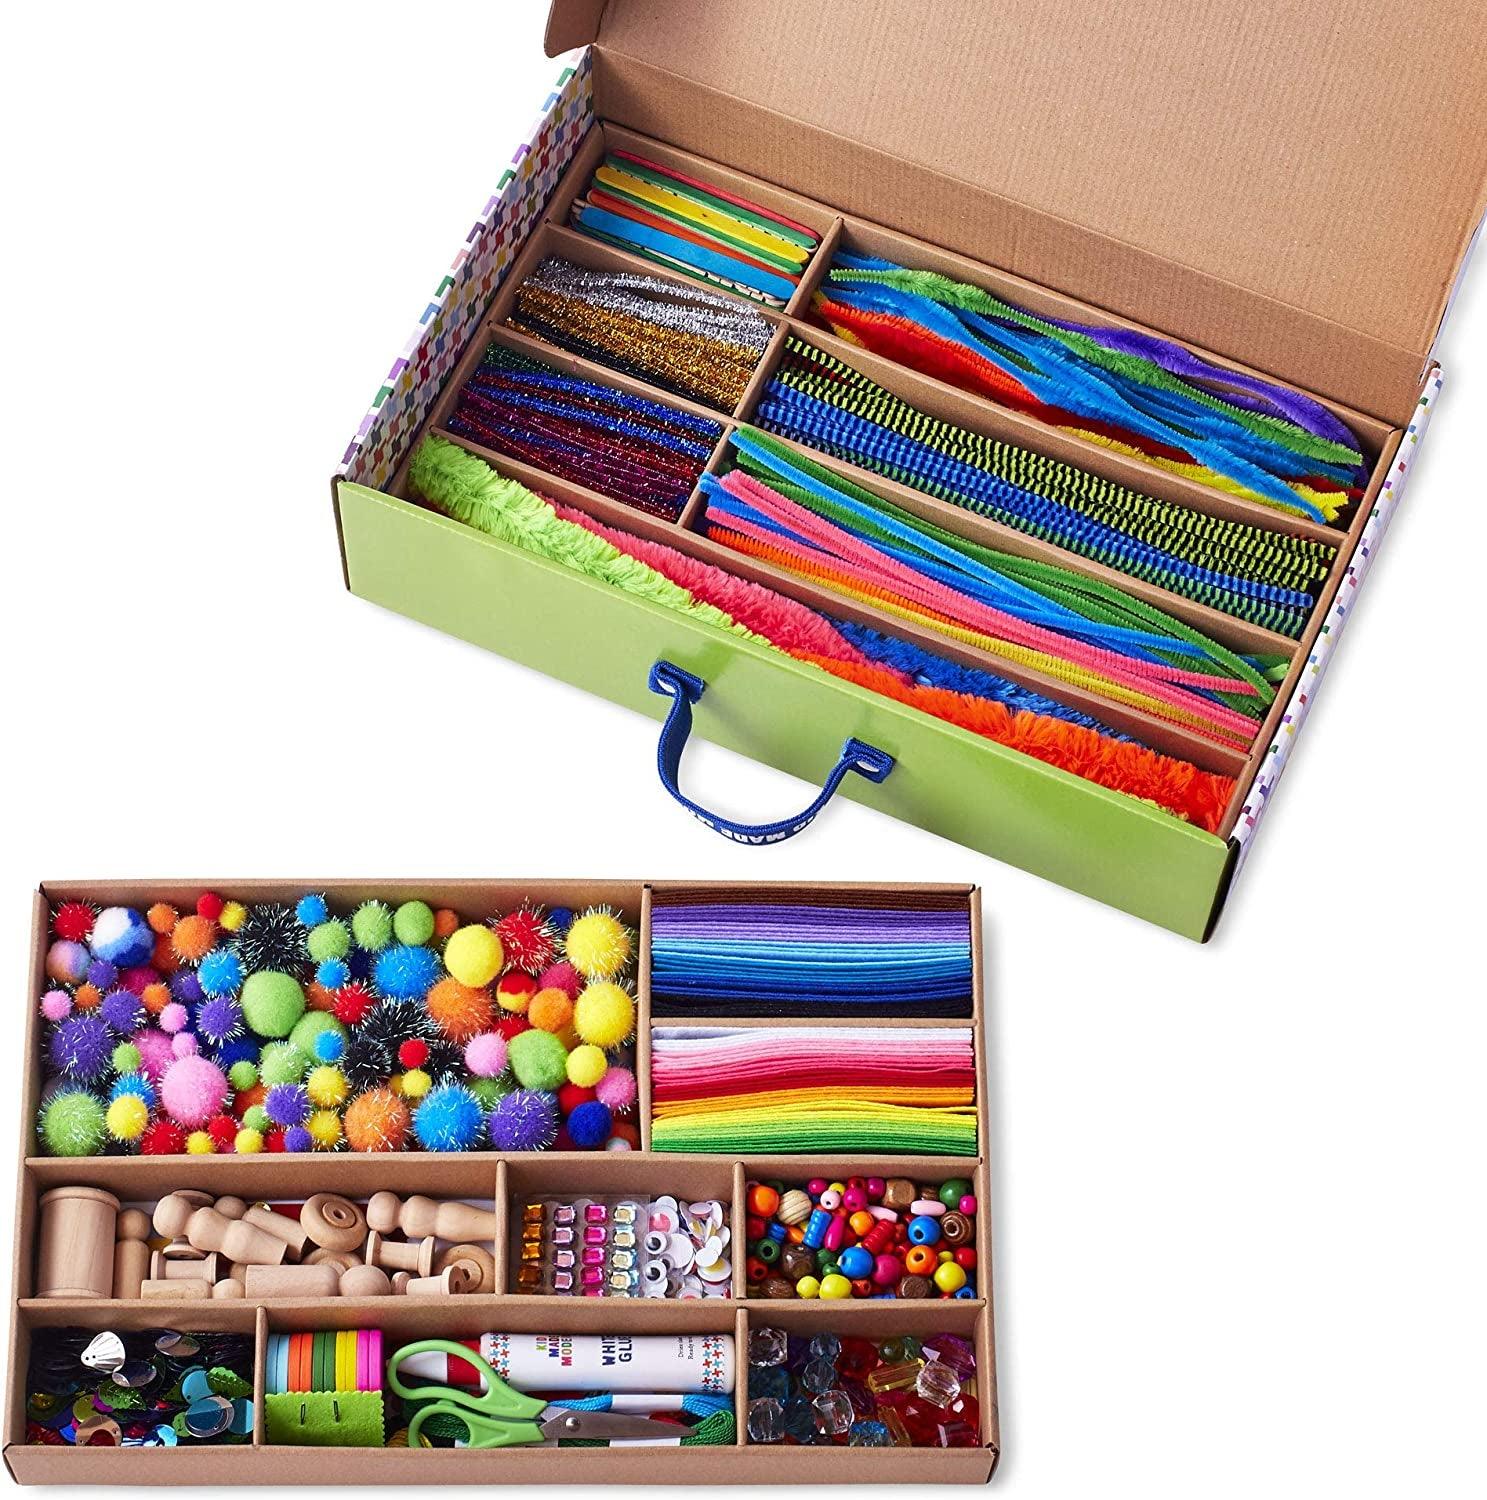 https://woodartsupply.com/cdn/shop/files/arts-and-crafts-supply-library-craft-supplies-learning-activities-kids-brain-boosting-crafting-kit-coloring-kit-woodartsupply-3_9f2f1cdc-0574-4ca0-86df-0e7759953c1f.jpg?v=1696140751&width=1946